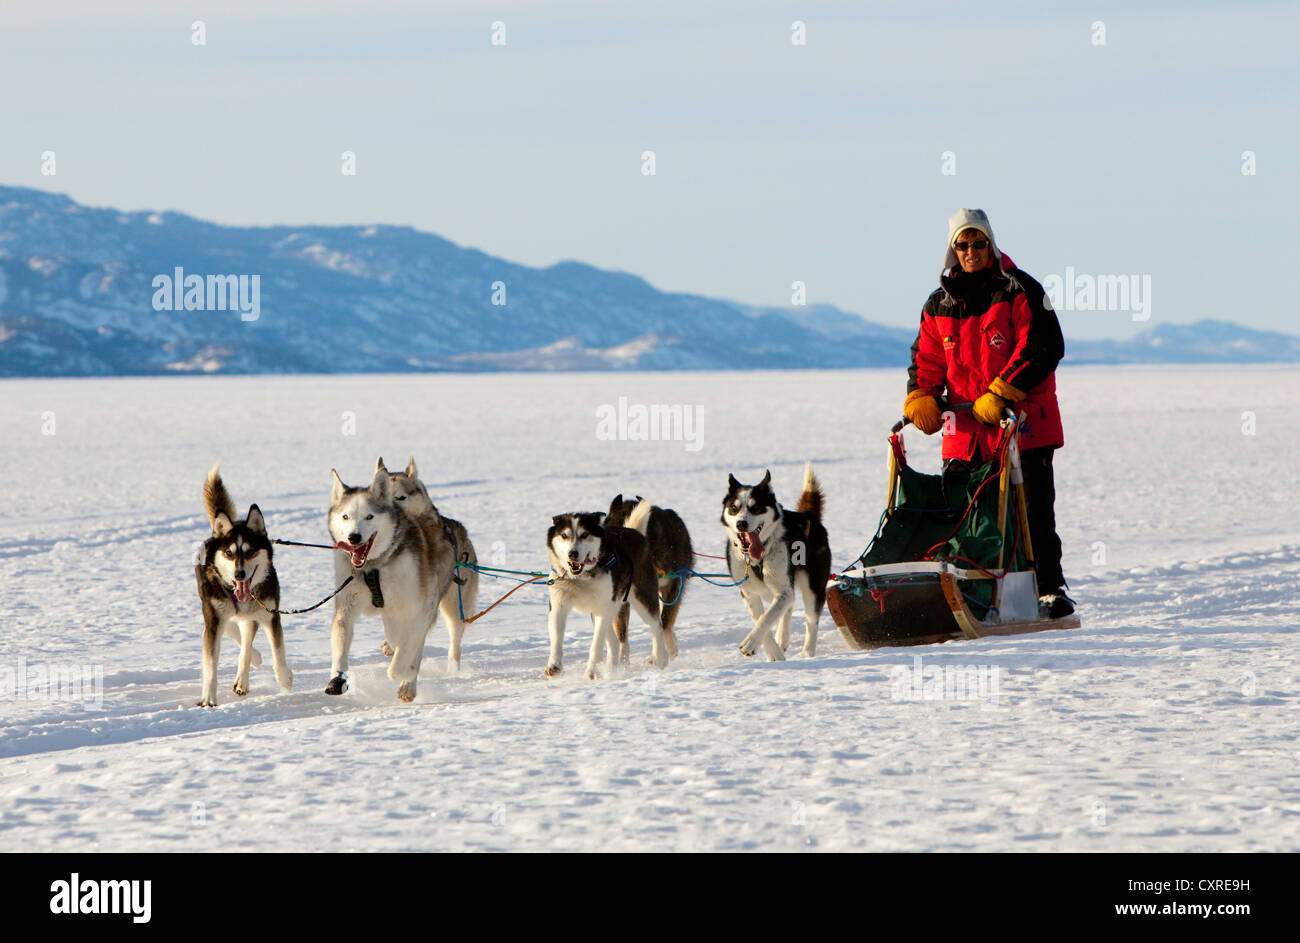 Woman, musher running, driving a dog sled, team of sled dogs, Alaskan Huskies, Mountains behind, frozen Lake Laberge Stock Photo